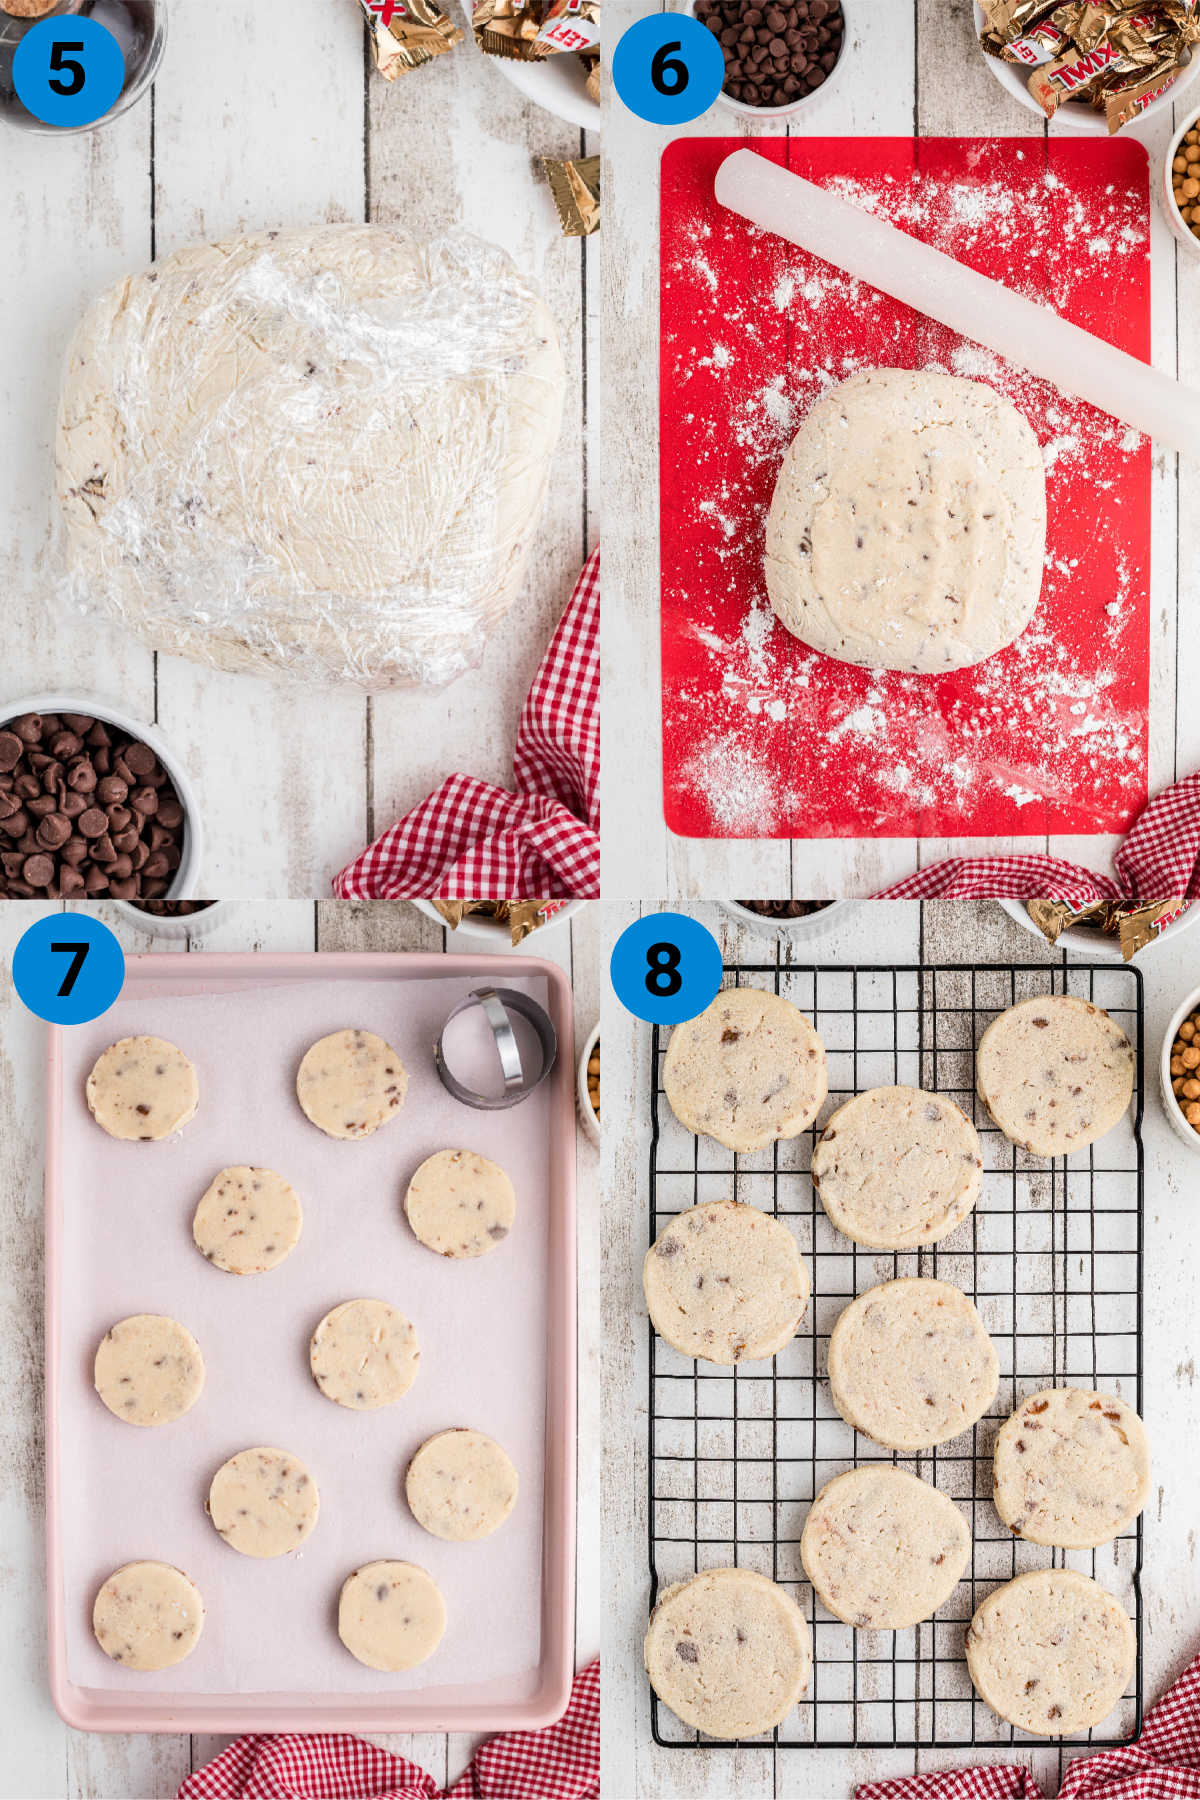 A collage of four images showing how to make Copycat Crumbl Twix Cookies, steps 5-8.